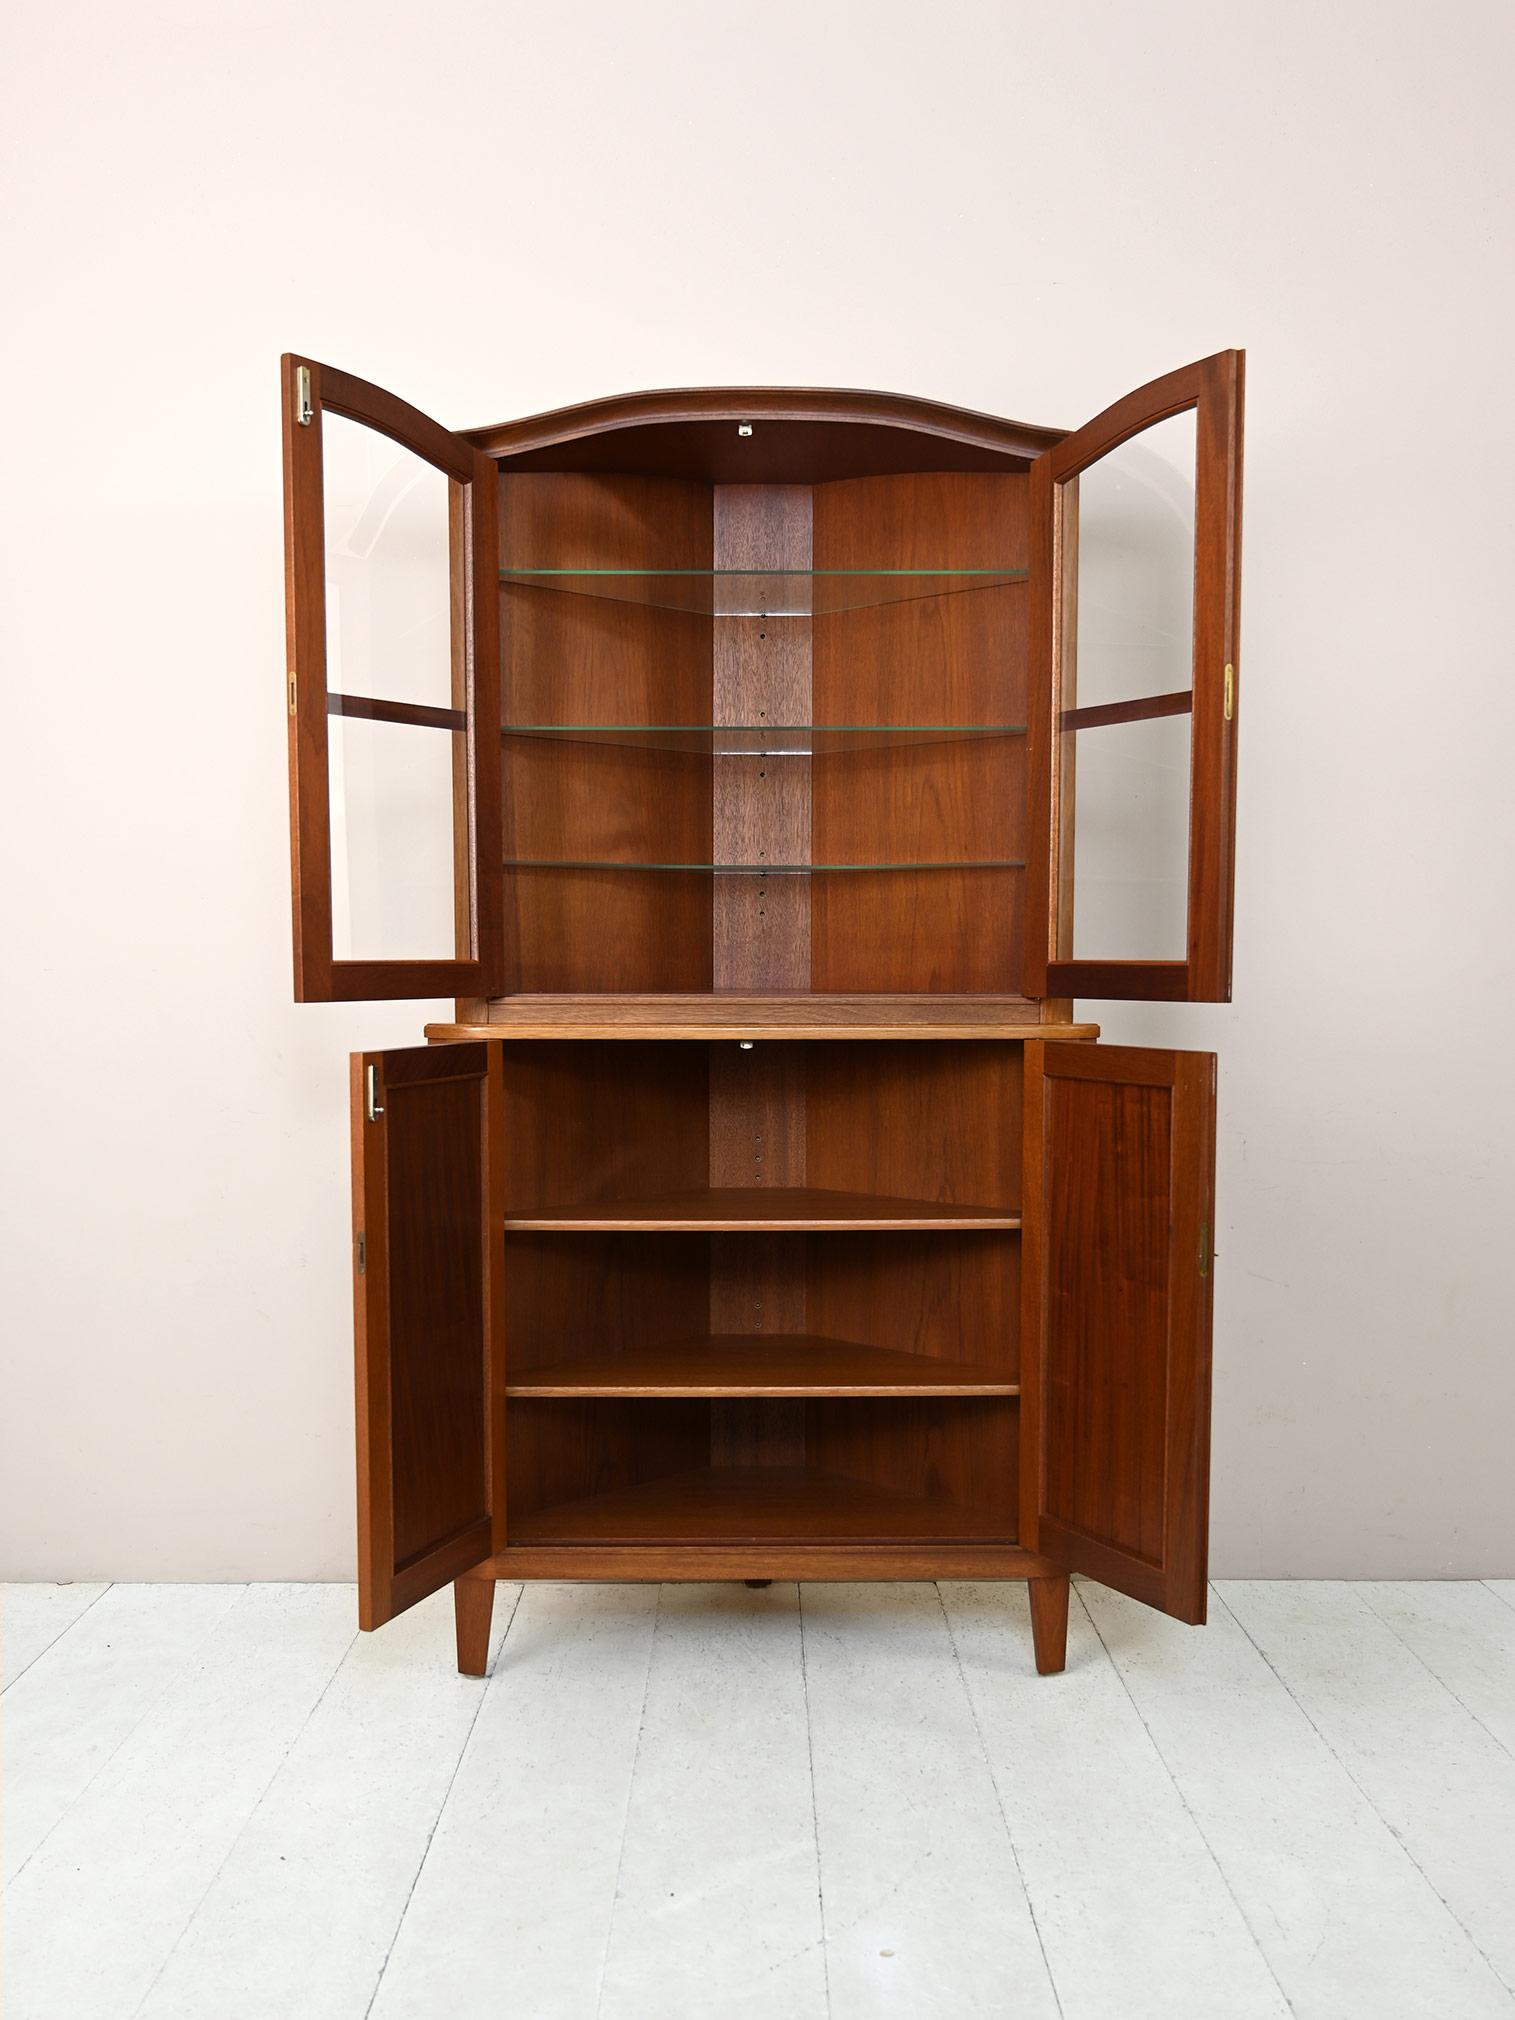 Vintage two-body teak corner cabinet.

An iconic Scandinavian 1960s design furniture piece.
The lower part is a storage compartment with hinged doors, and the upper part consists of glass shelving and is closed by a lockable